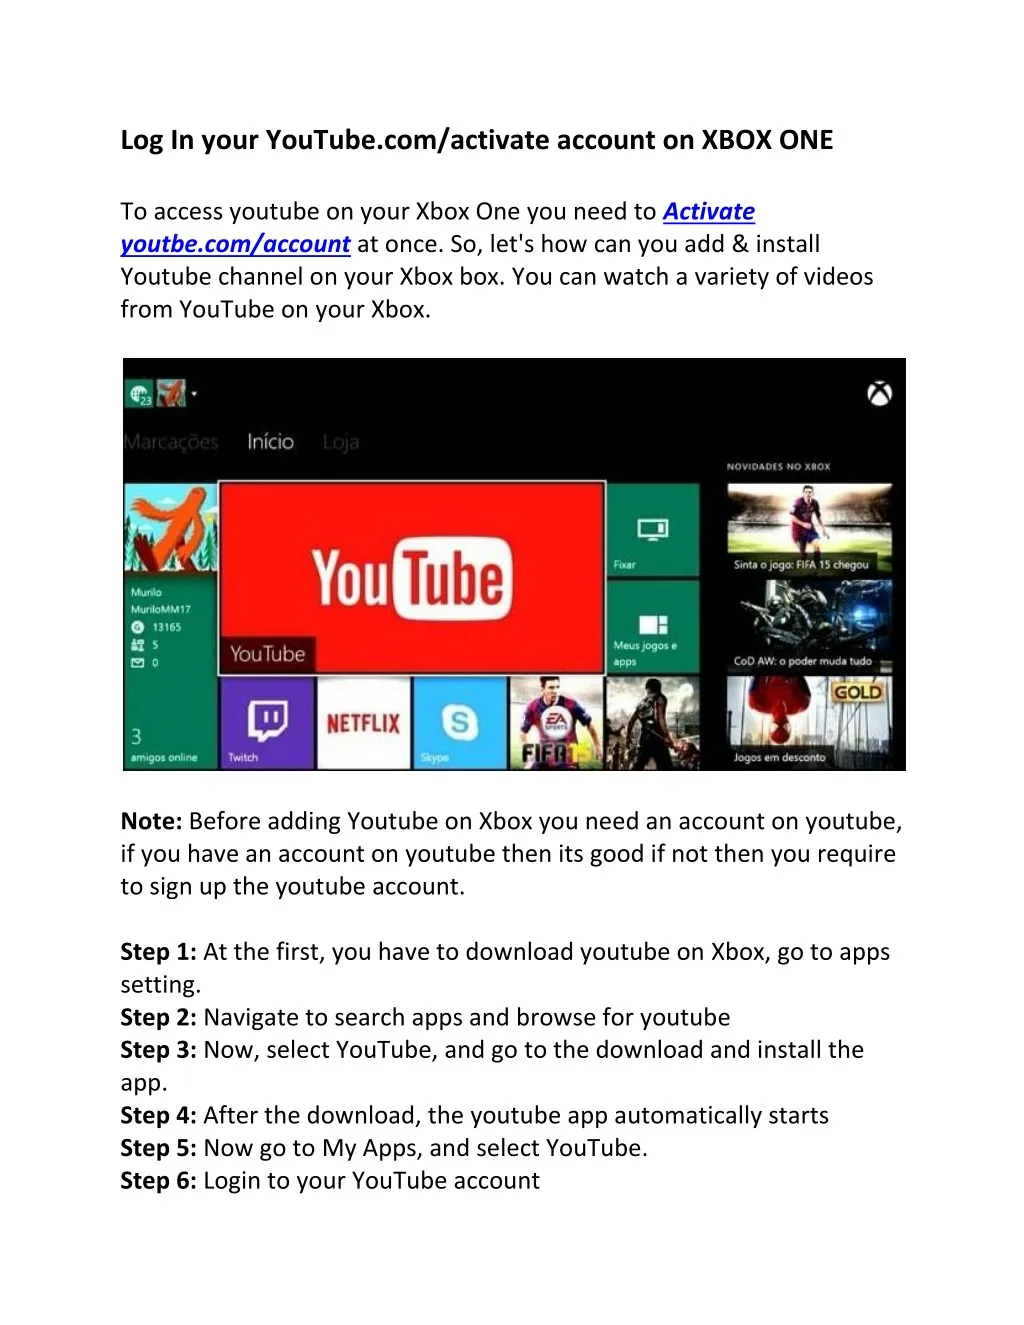 log in your youtube com activate account on xbox